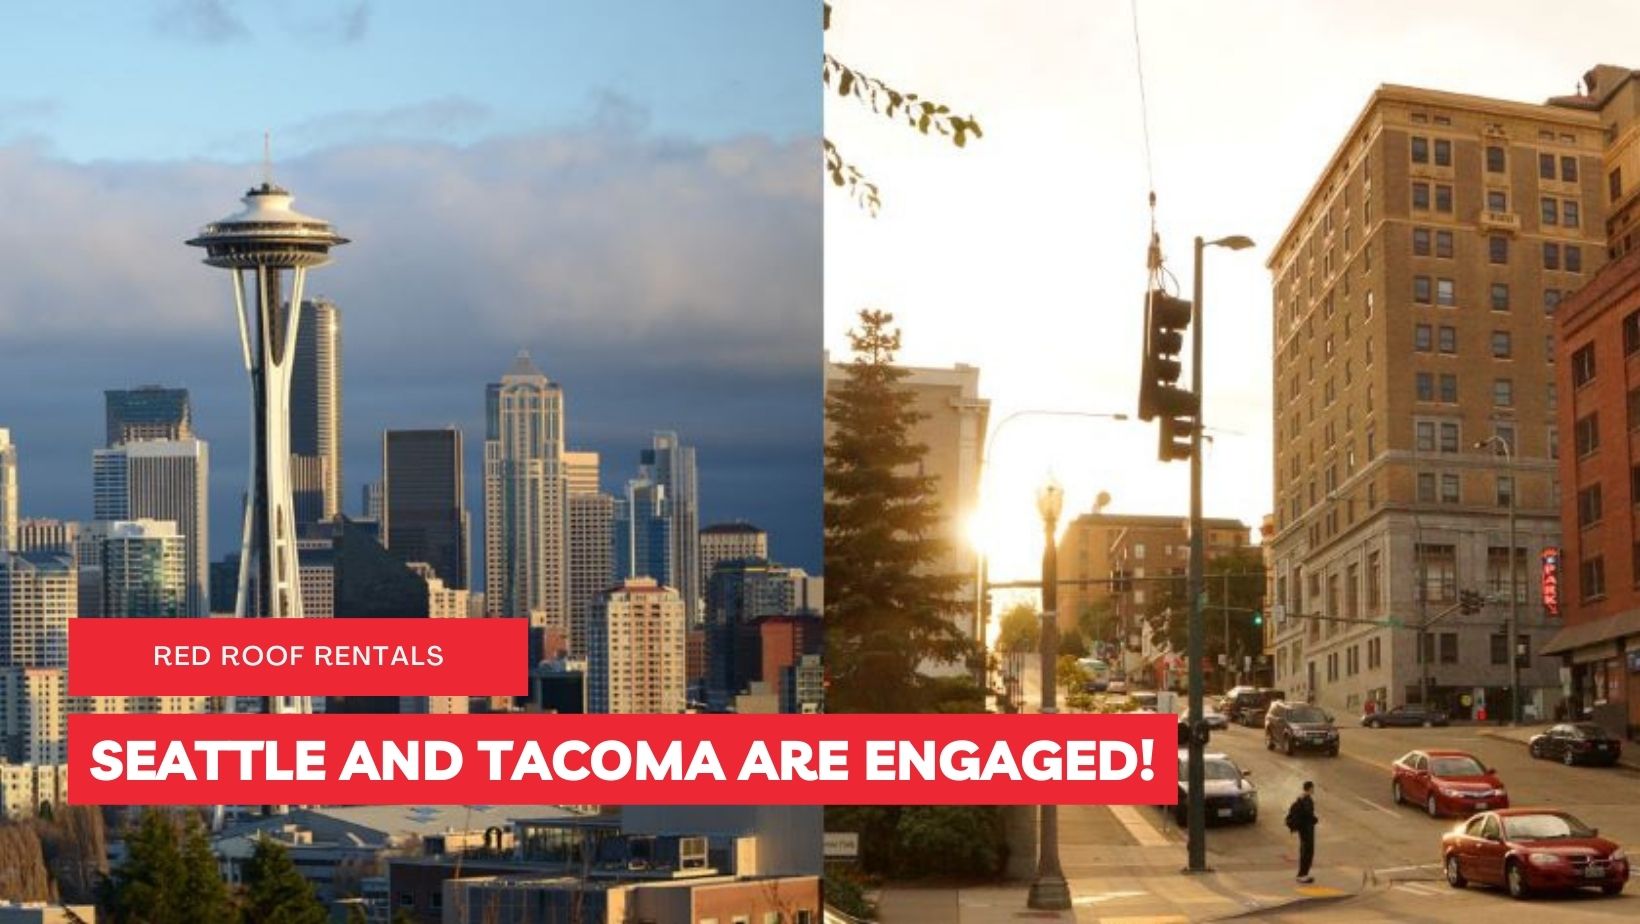 SEATTLE AND TACOMA ARE ENGAGED!